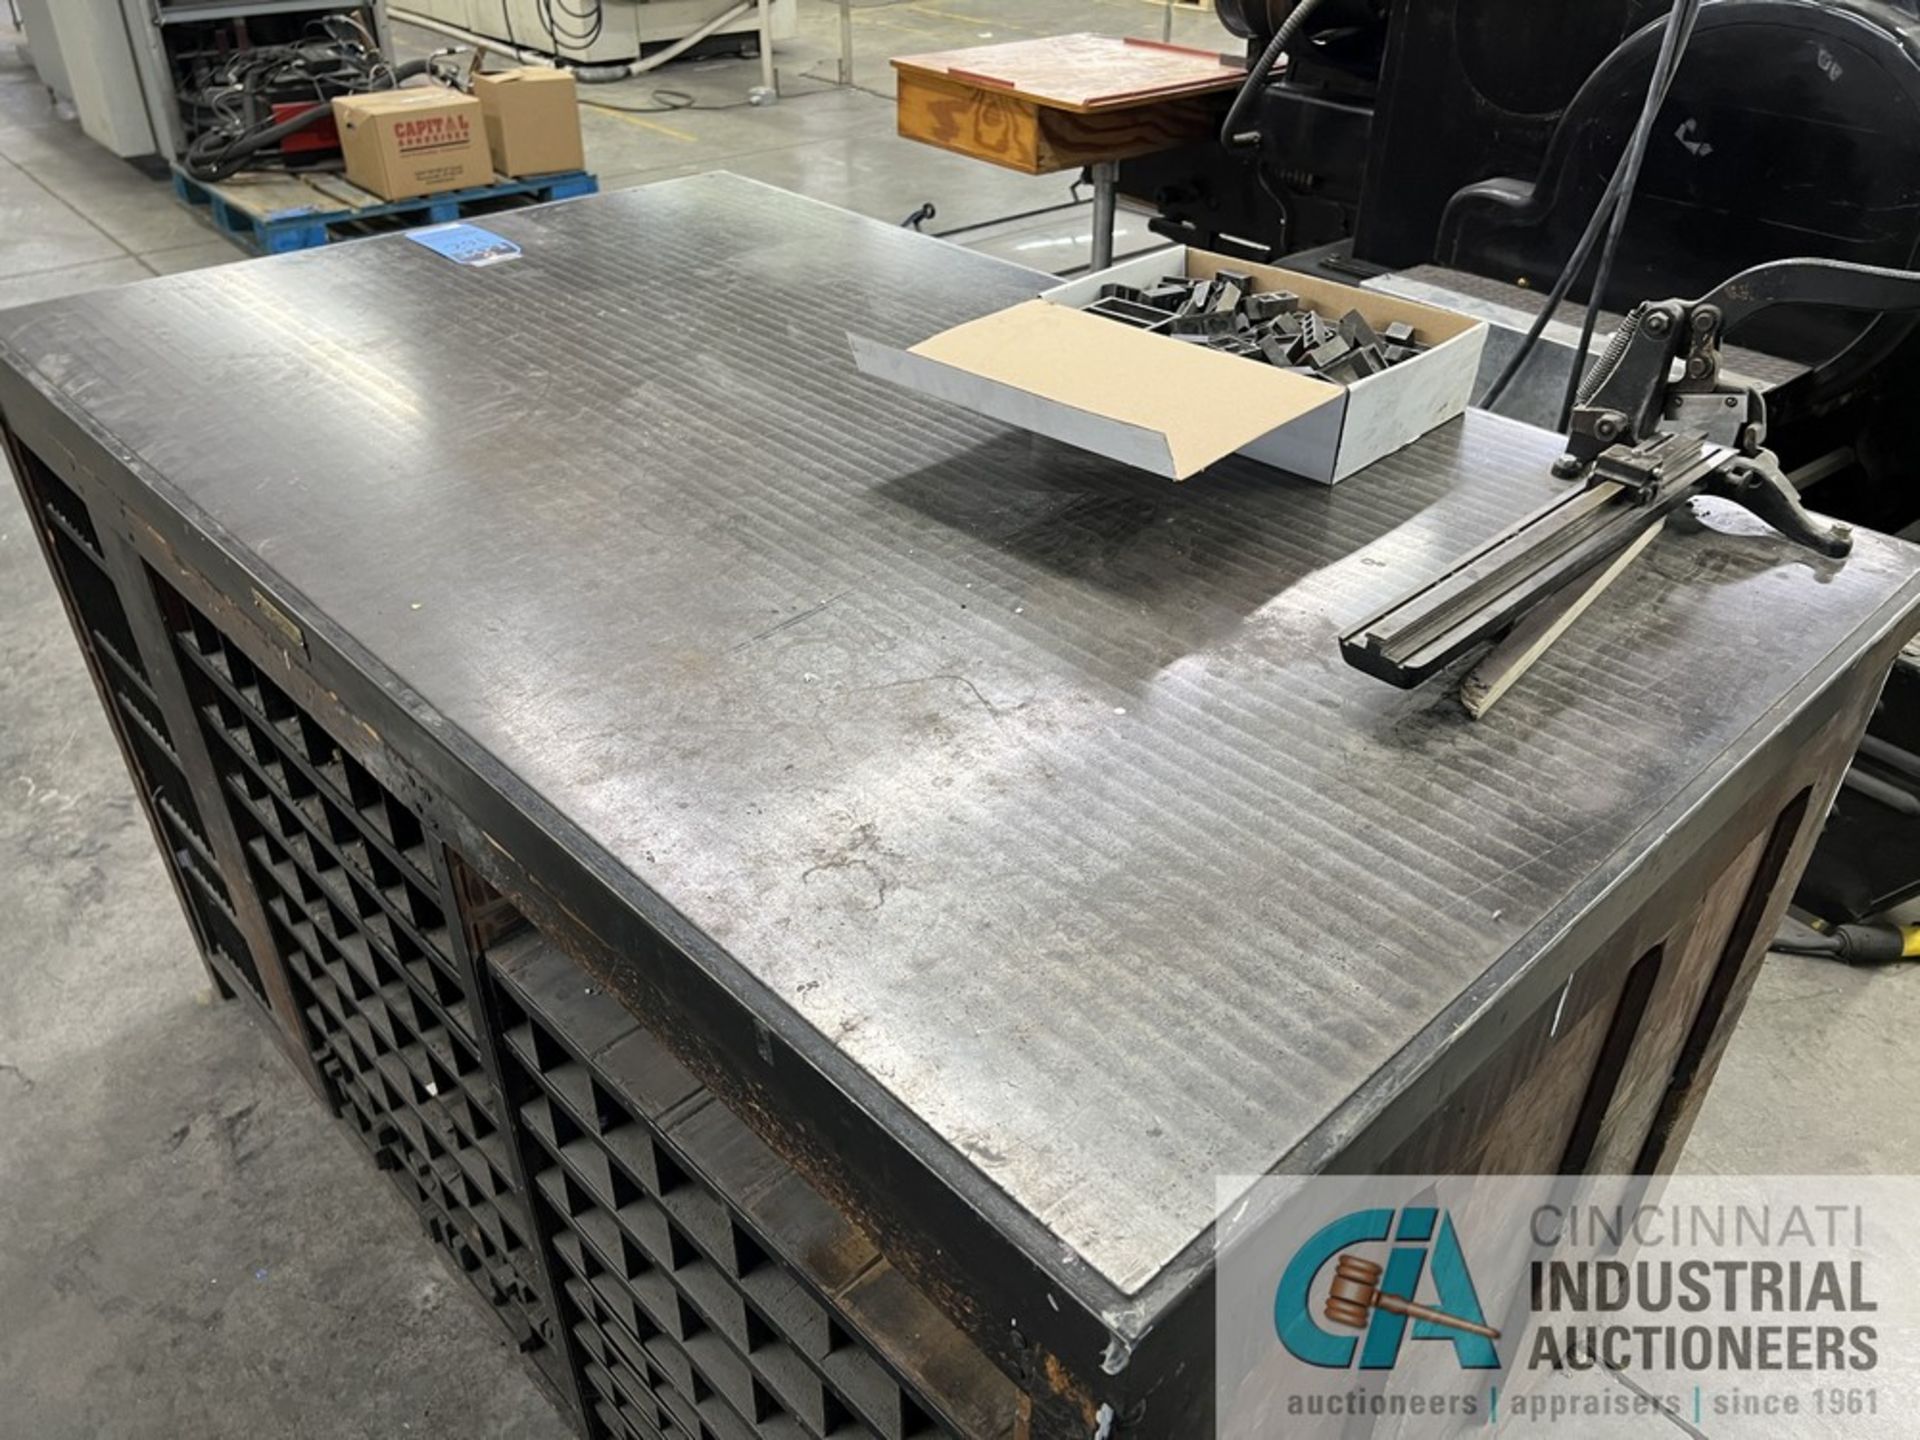 65" X 39" THE CHALLENGE MACHINERY CO. STEEL TOP LAYOUT TABLE - Image 5 of 8